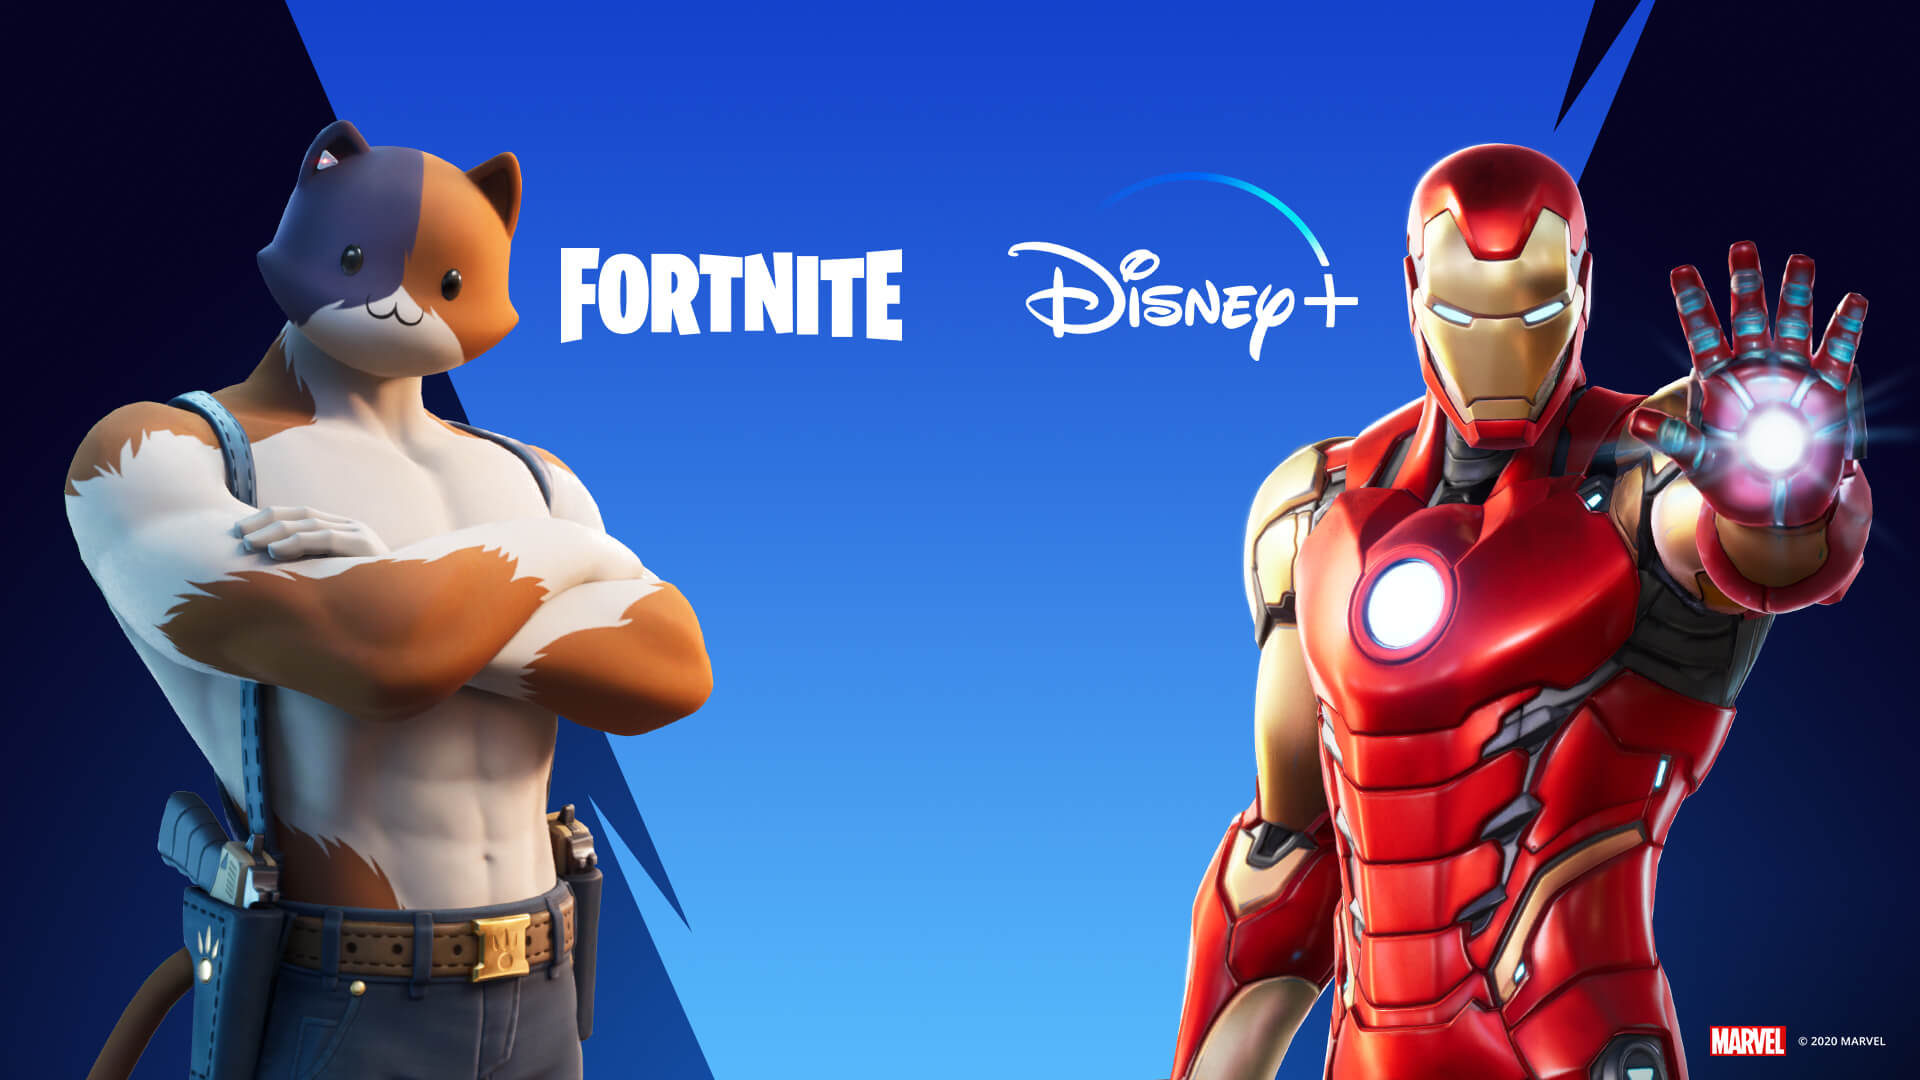 Fortnite players can get 2 months Disney+ for free if they make in-game purchases